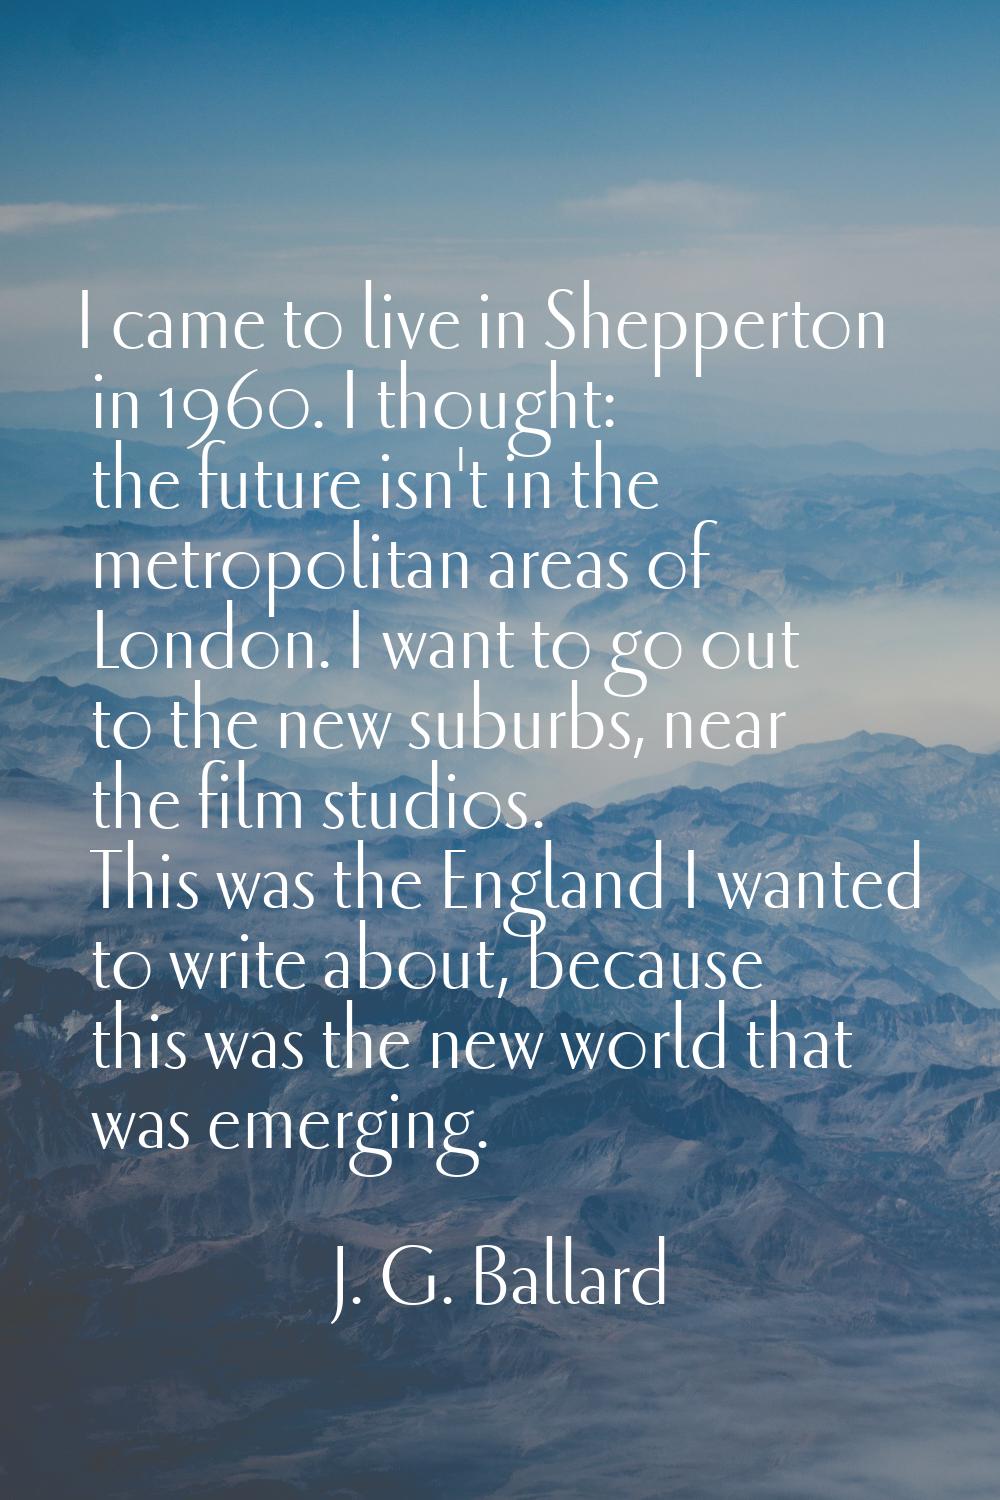 I came to live in Shepperton in 1960. I thought: the future isn't in the metropolitan areas of Lond